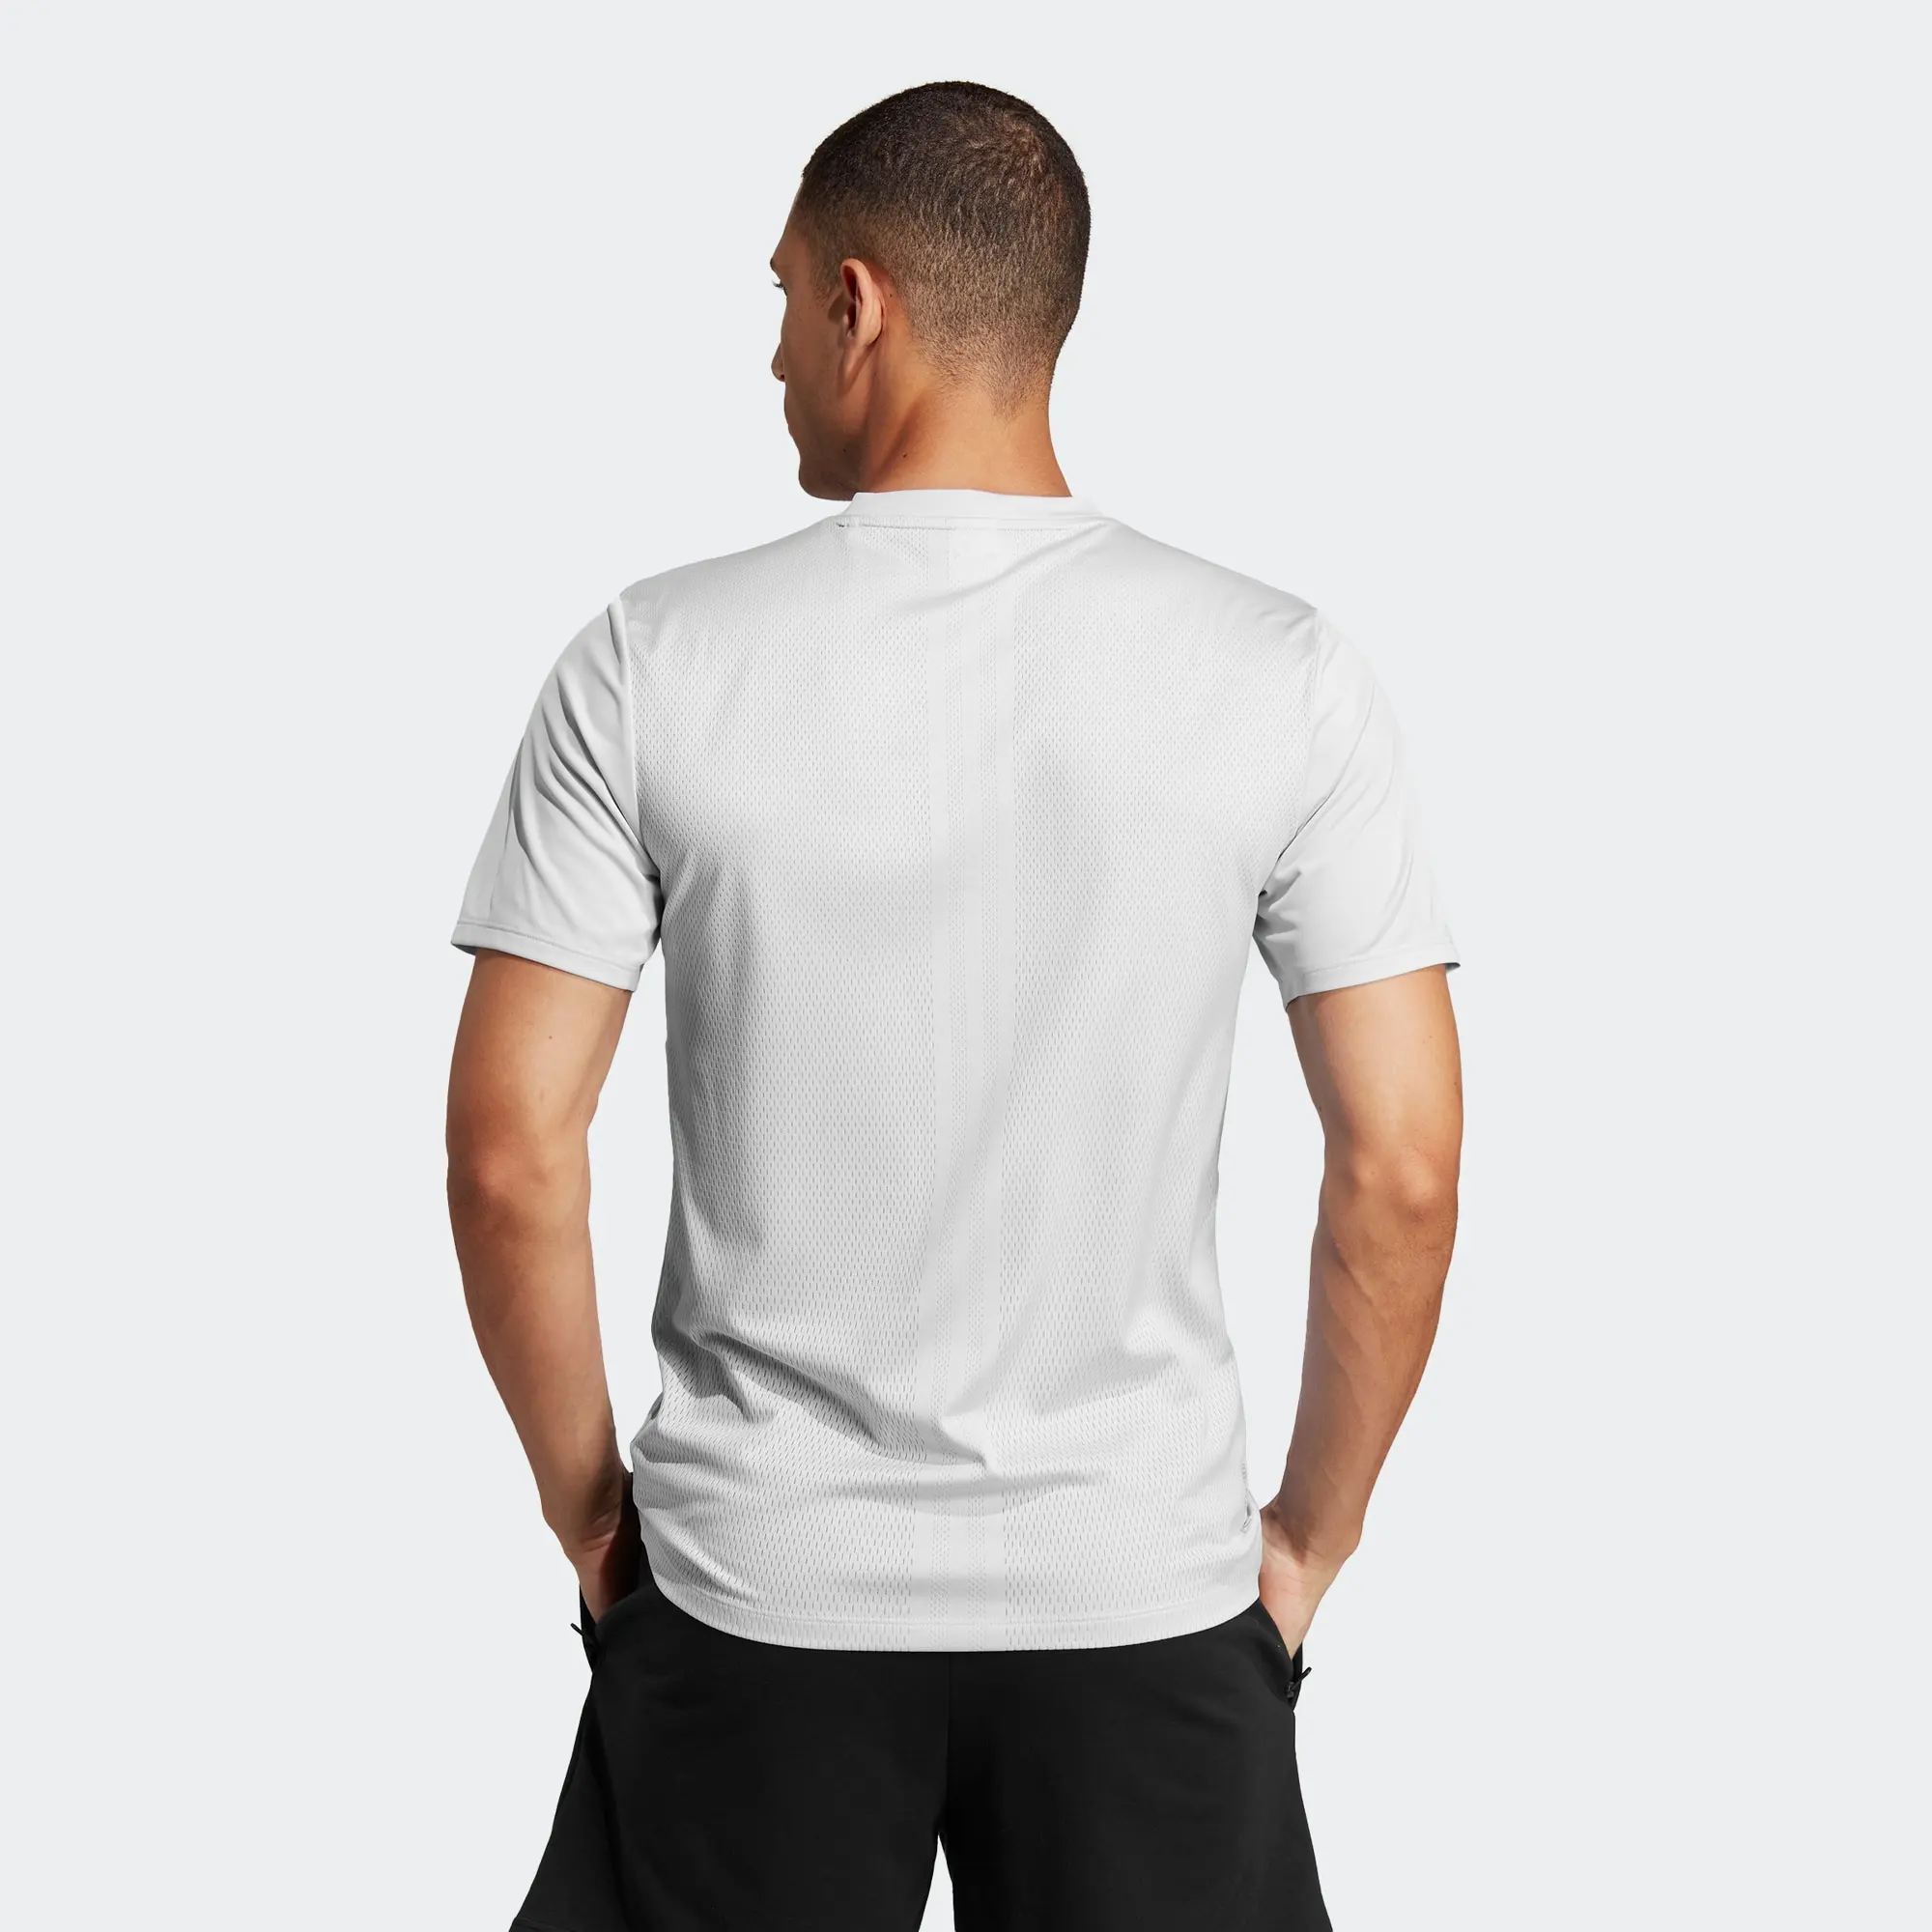 New Arrival Fitness Breathable Quick-Drying Sports Wear T Shirt for Men